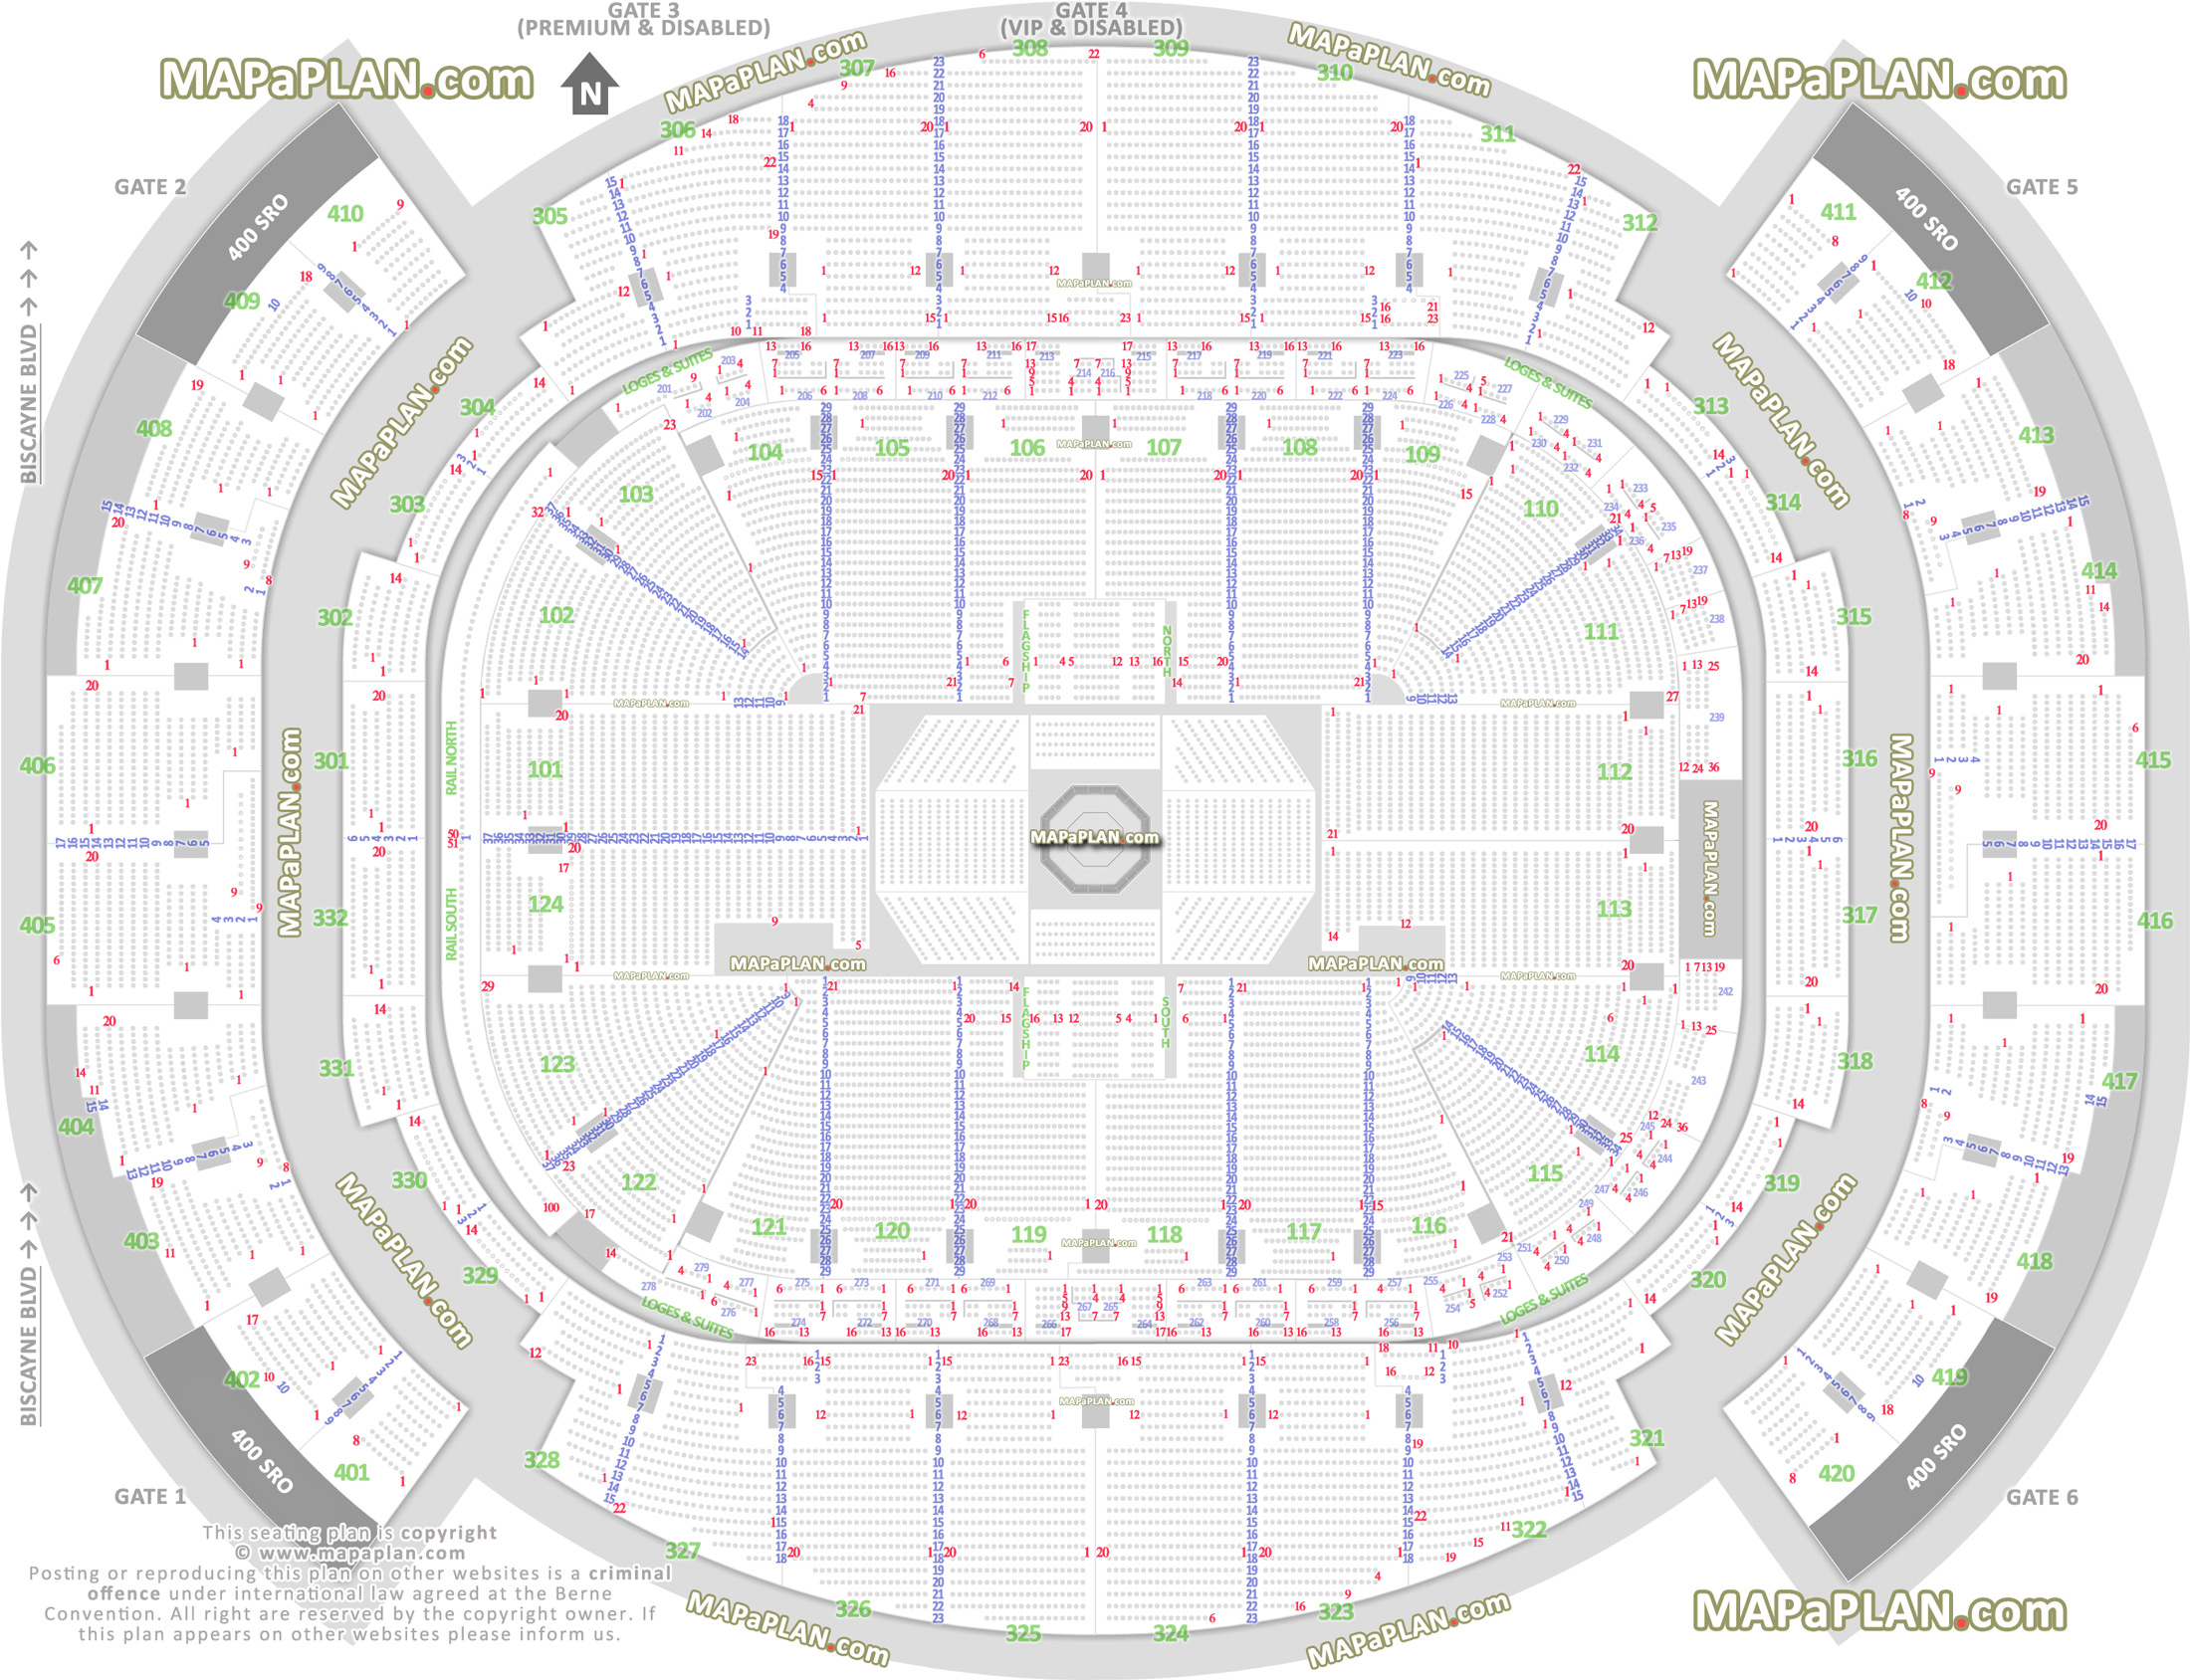 ufc mma fights fully seated setup chart viewer printable information guide balcony bowl rail seats numbering premium luxury executive vip suites Miami American Airlines Arena seating chart